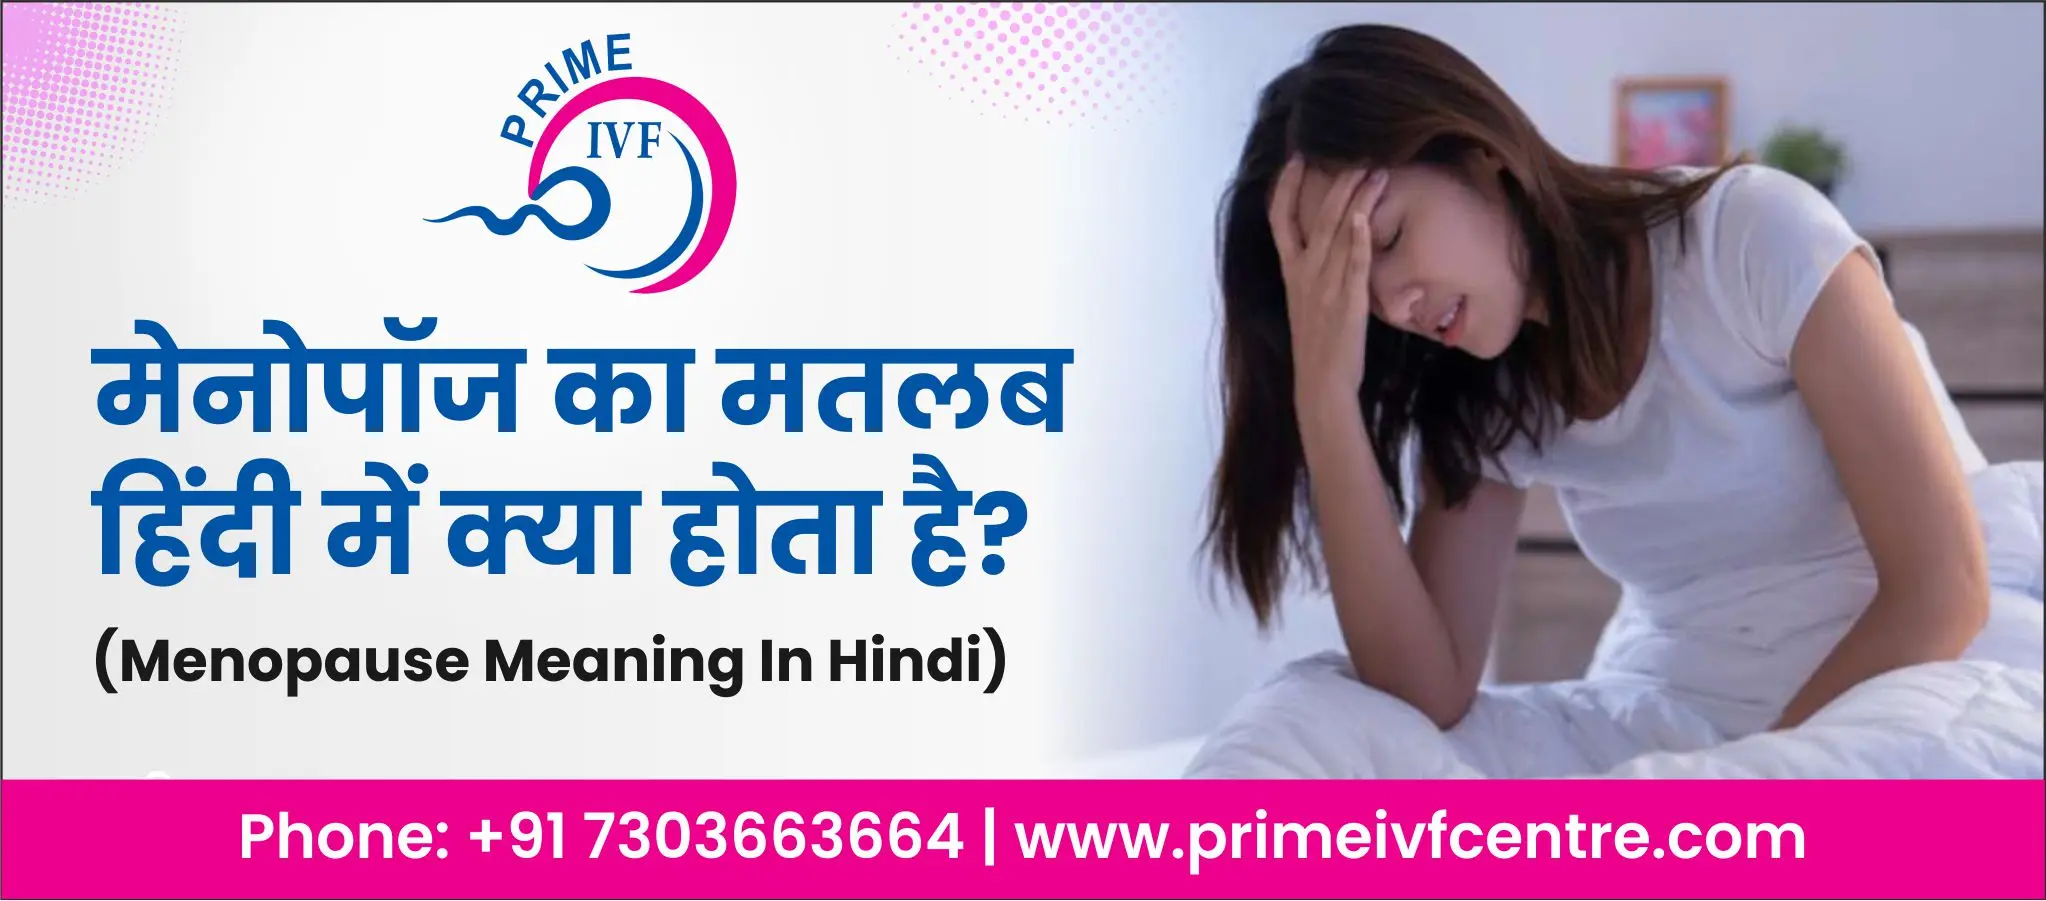 What are you now Meaning in Hindi  मीनिंग इन हिंदी